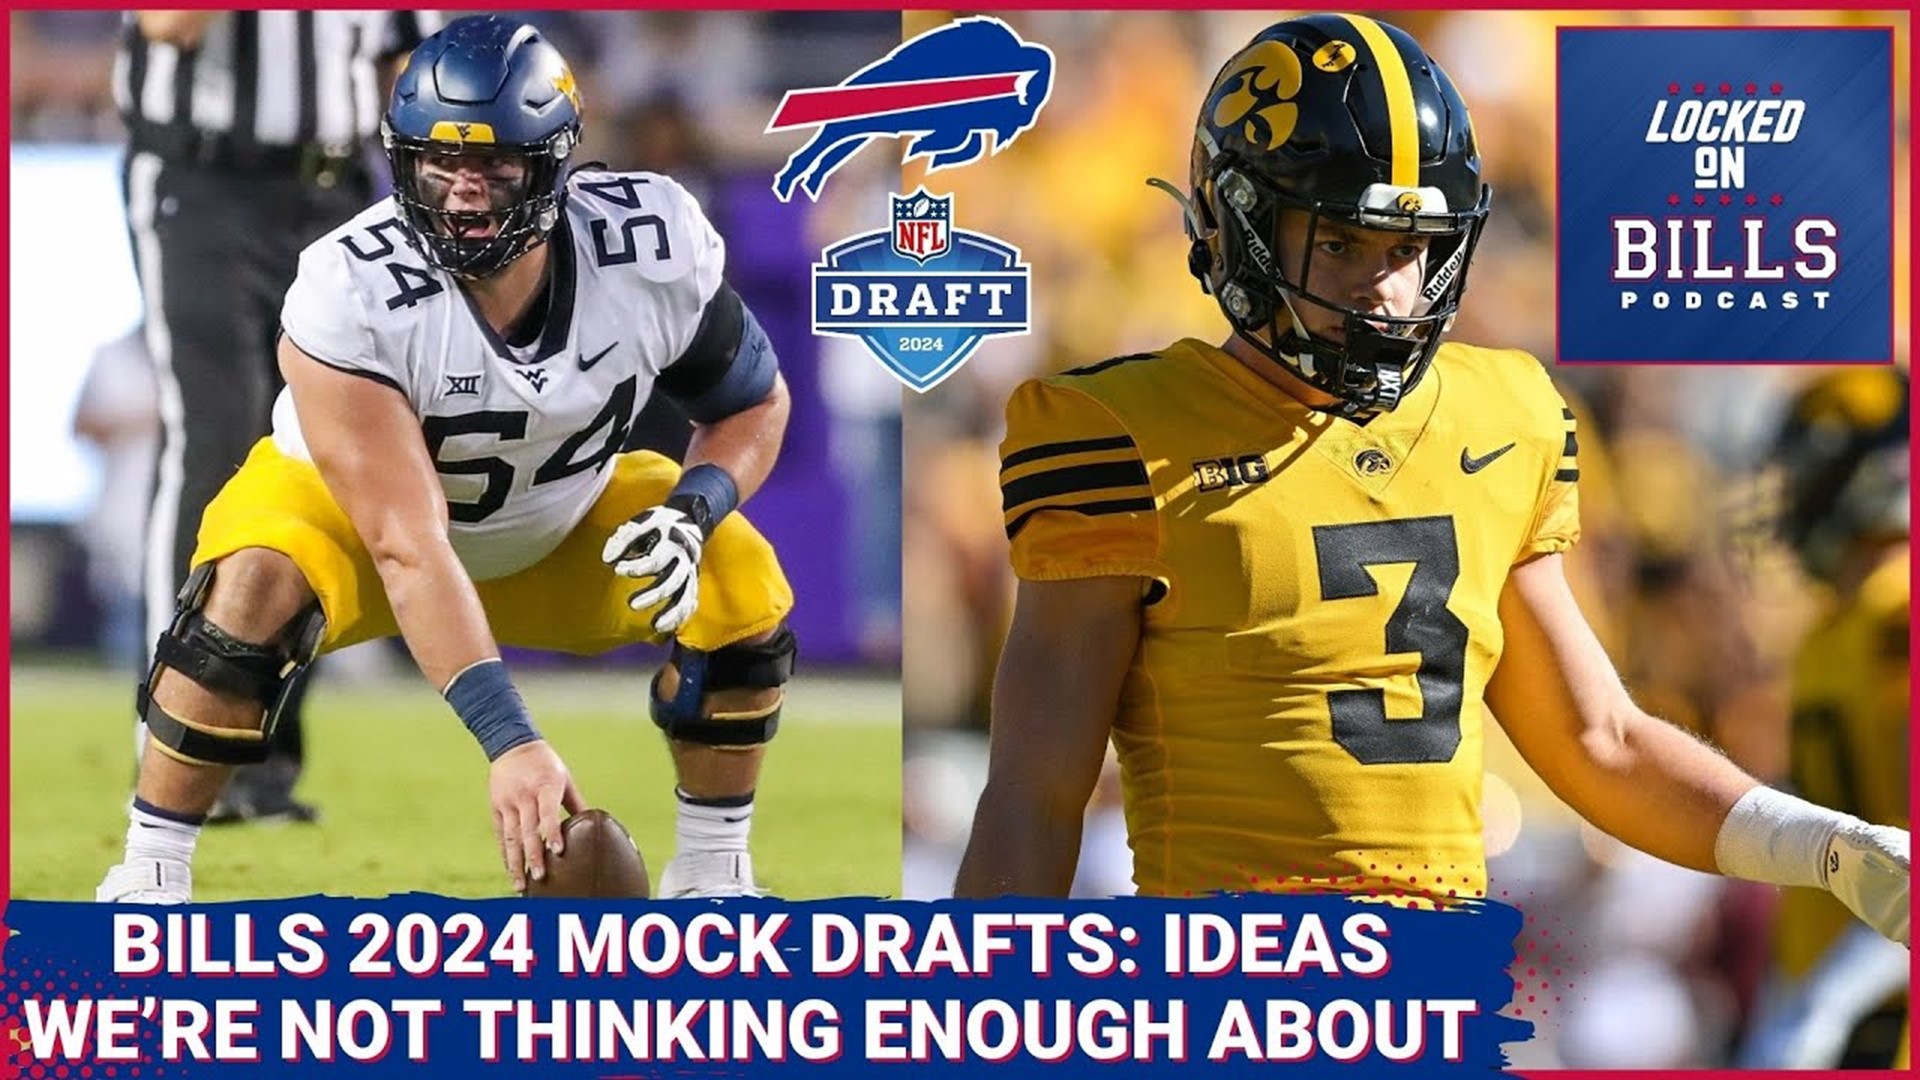 Buffalo Bills 2024 NFL Mock Draft Scenarios. R2 trade up, Trade back & what we’re not thinking about